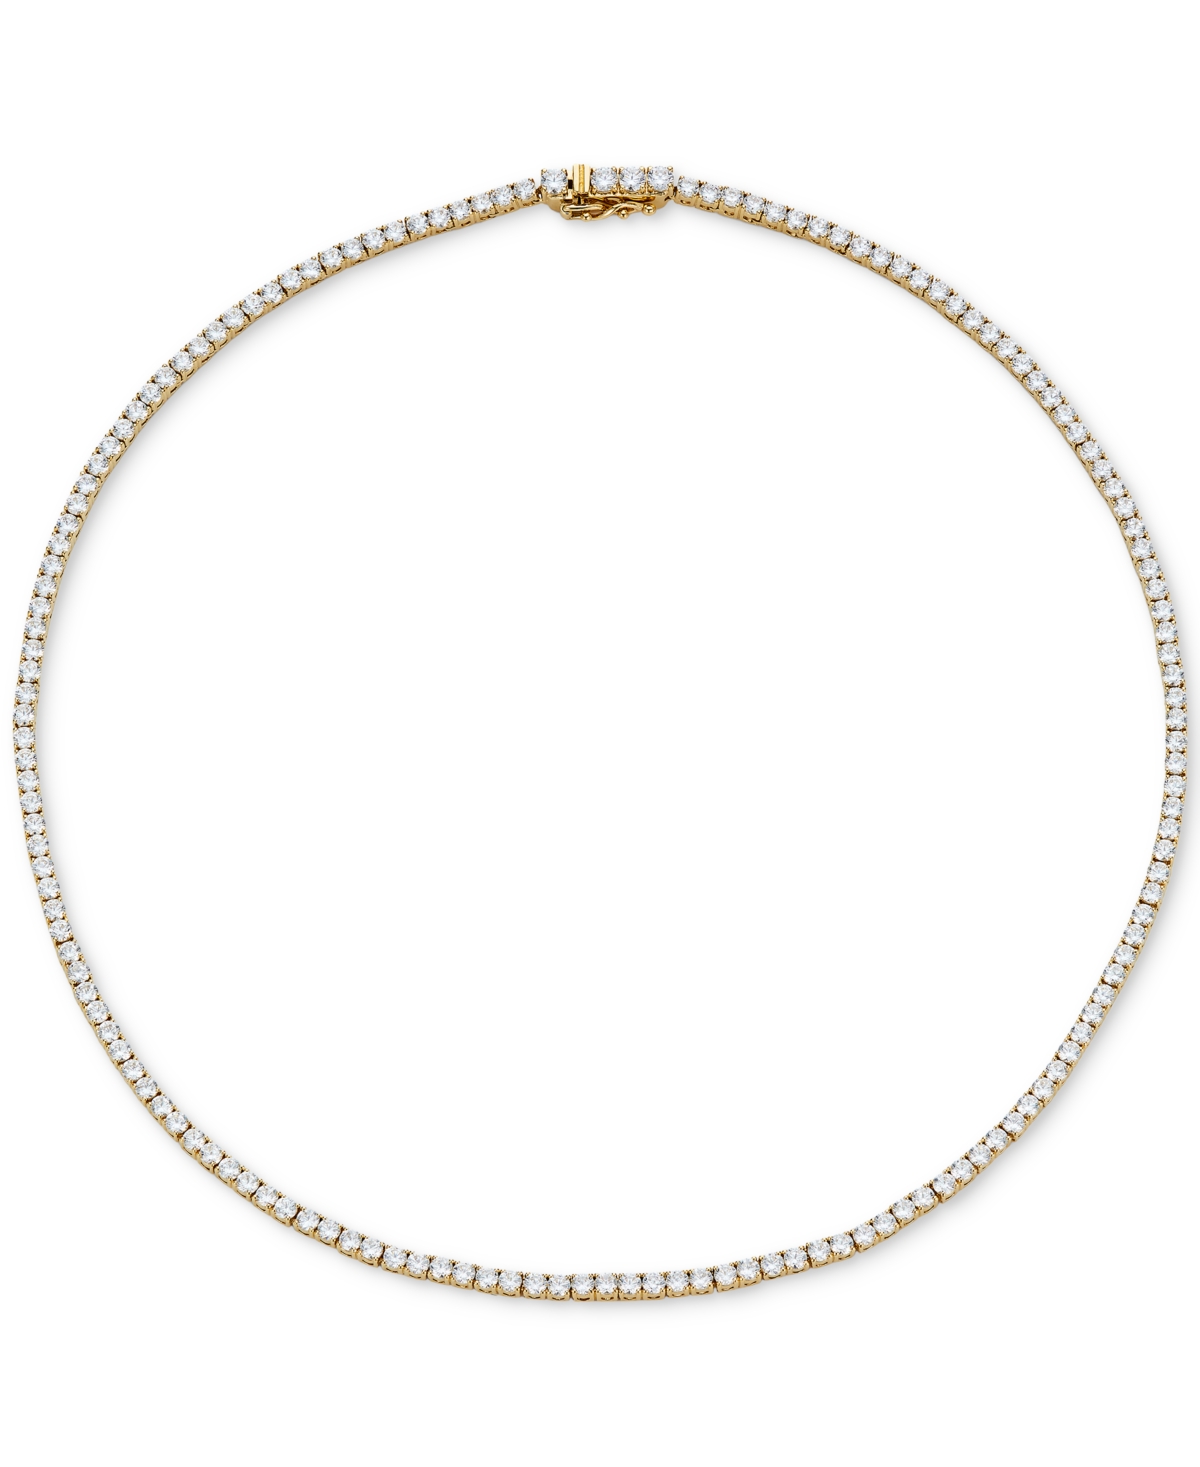 18k Gold-Plated Cubic Zirconia 16" Tennis Necklace, Created for Macy's - Gold